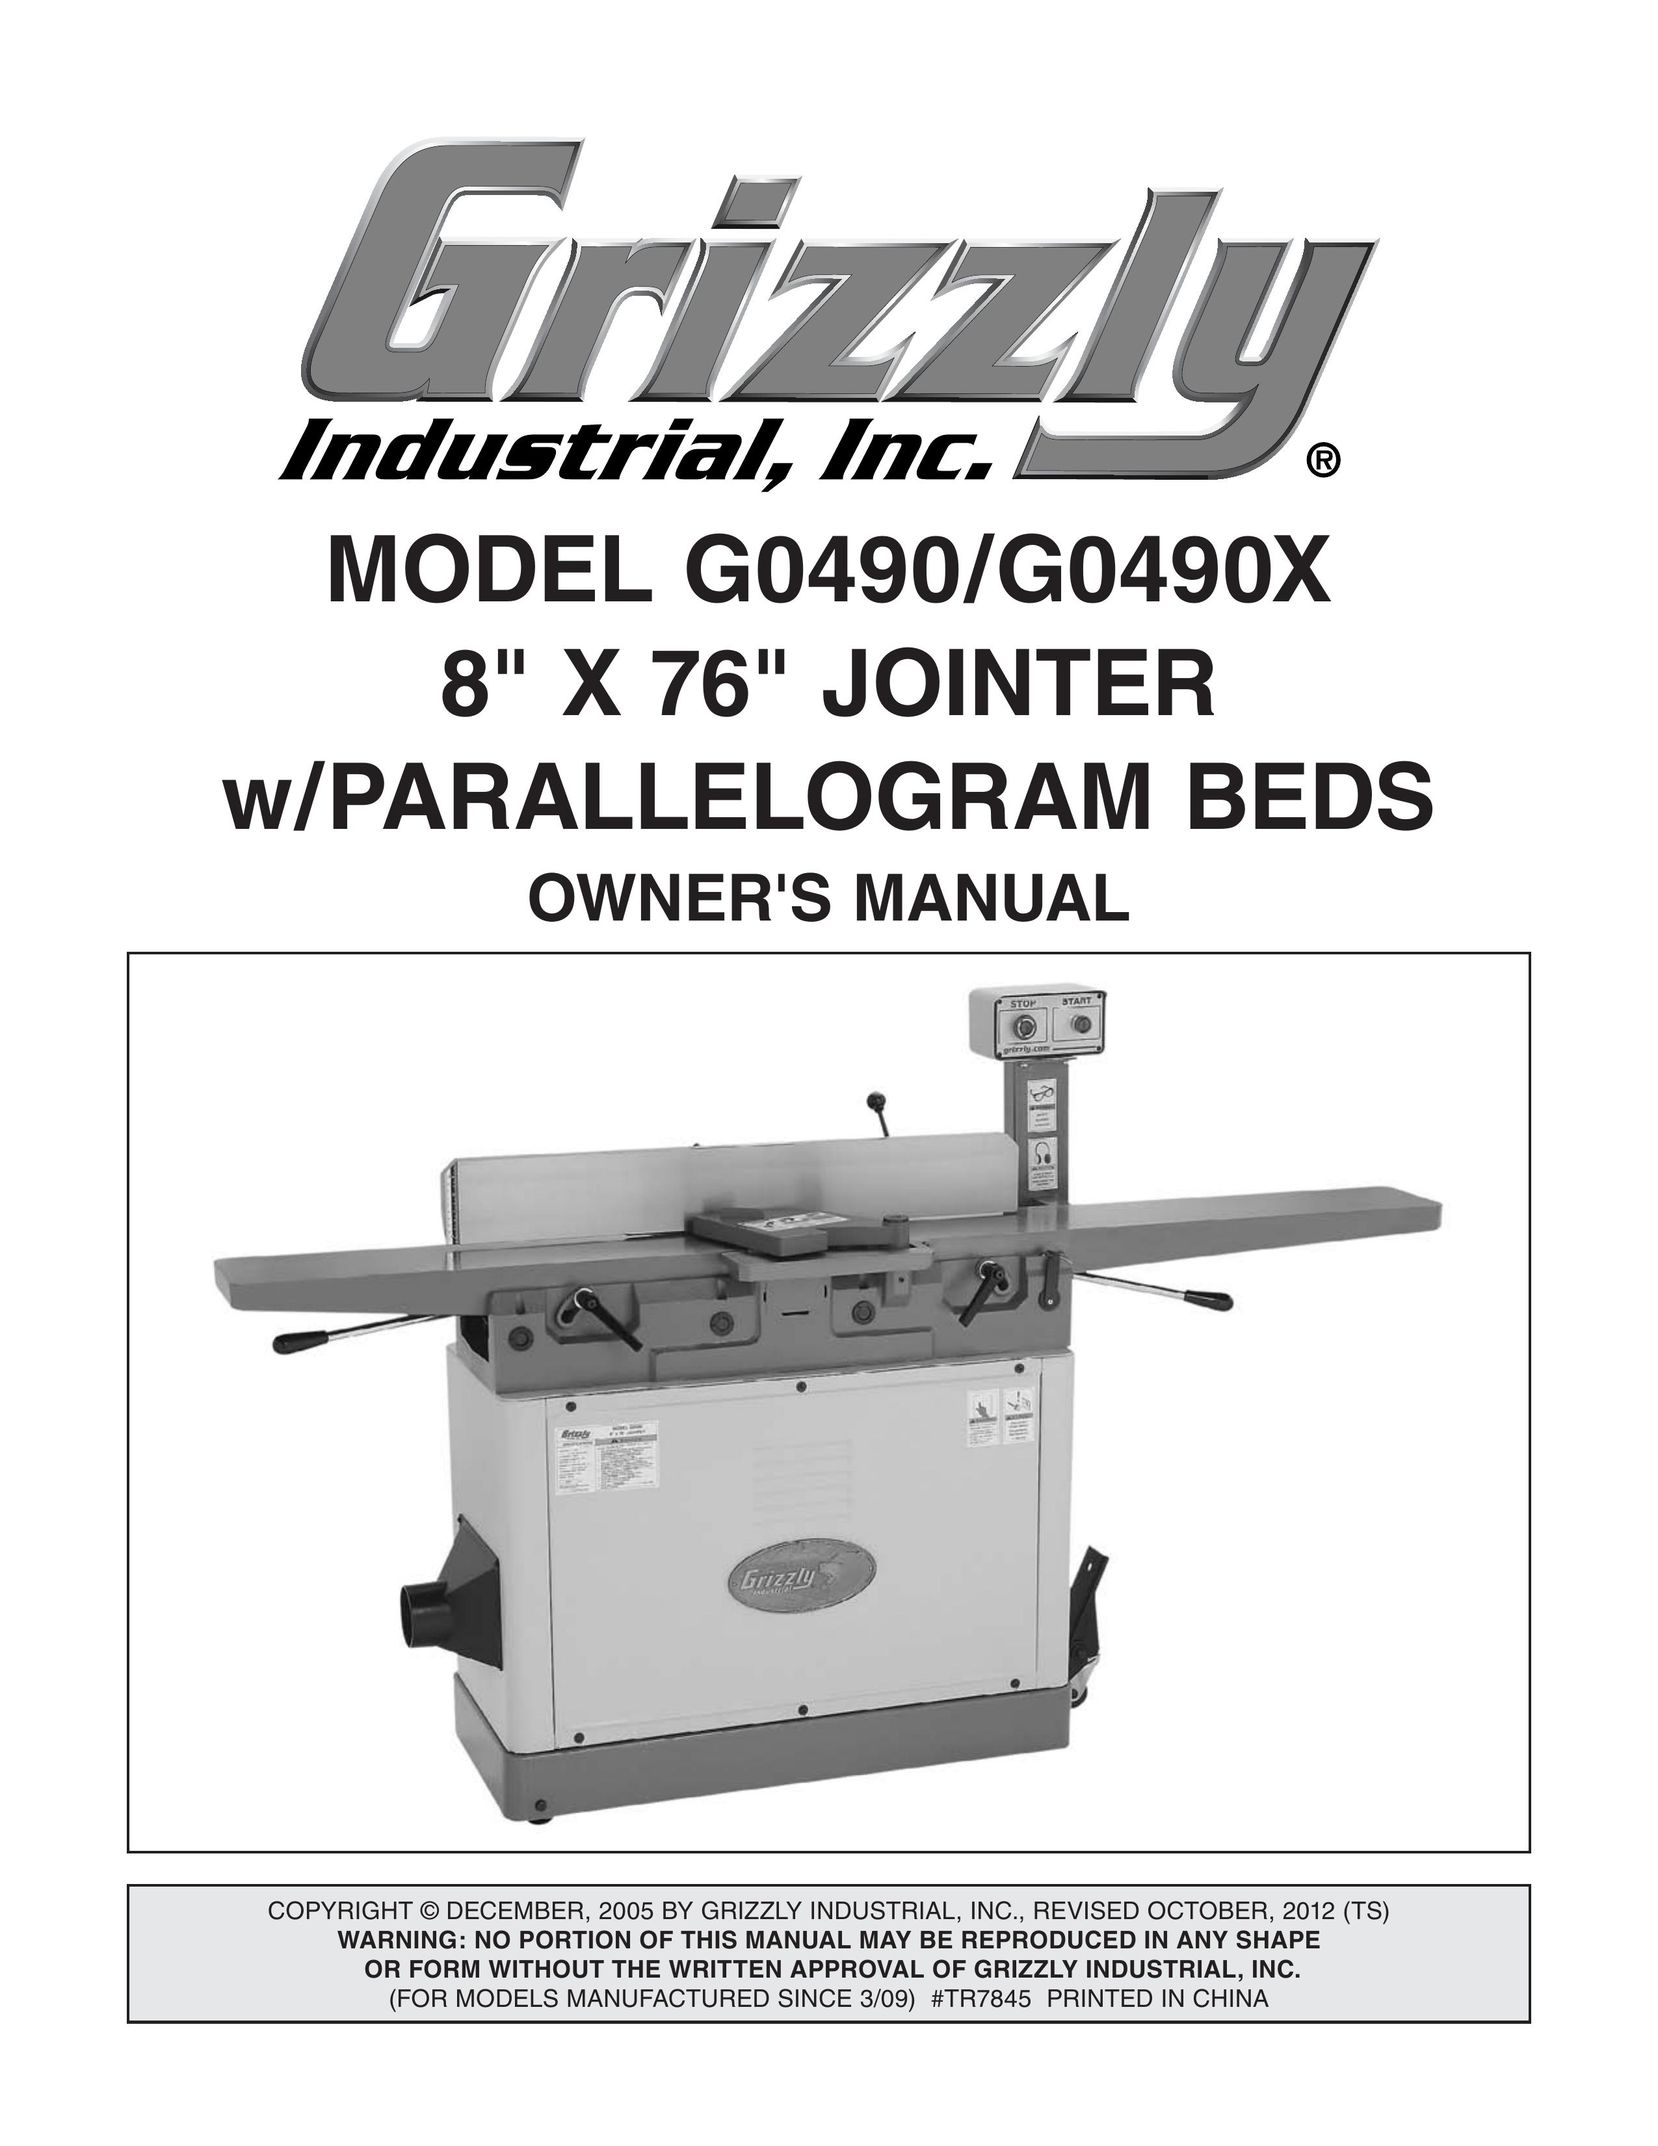 Grizzly G0490 Biscuit Joiner User Manual